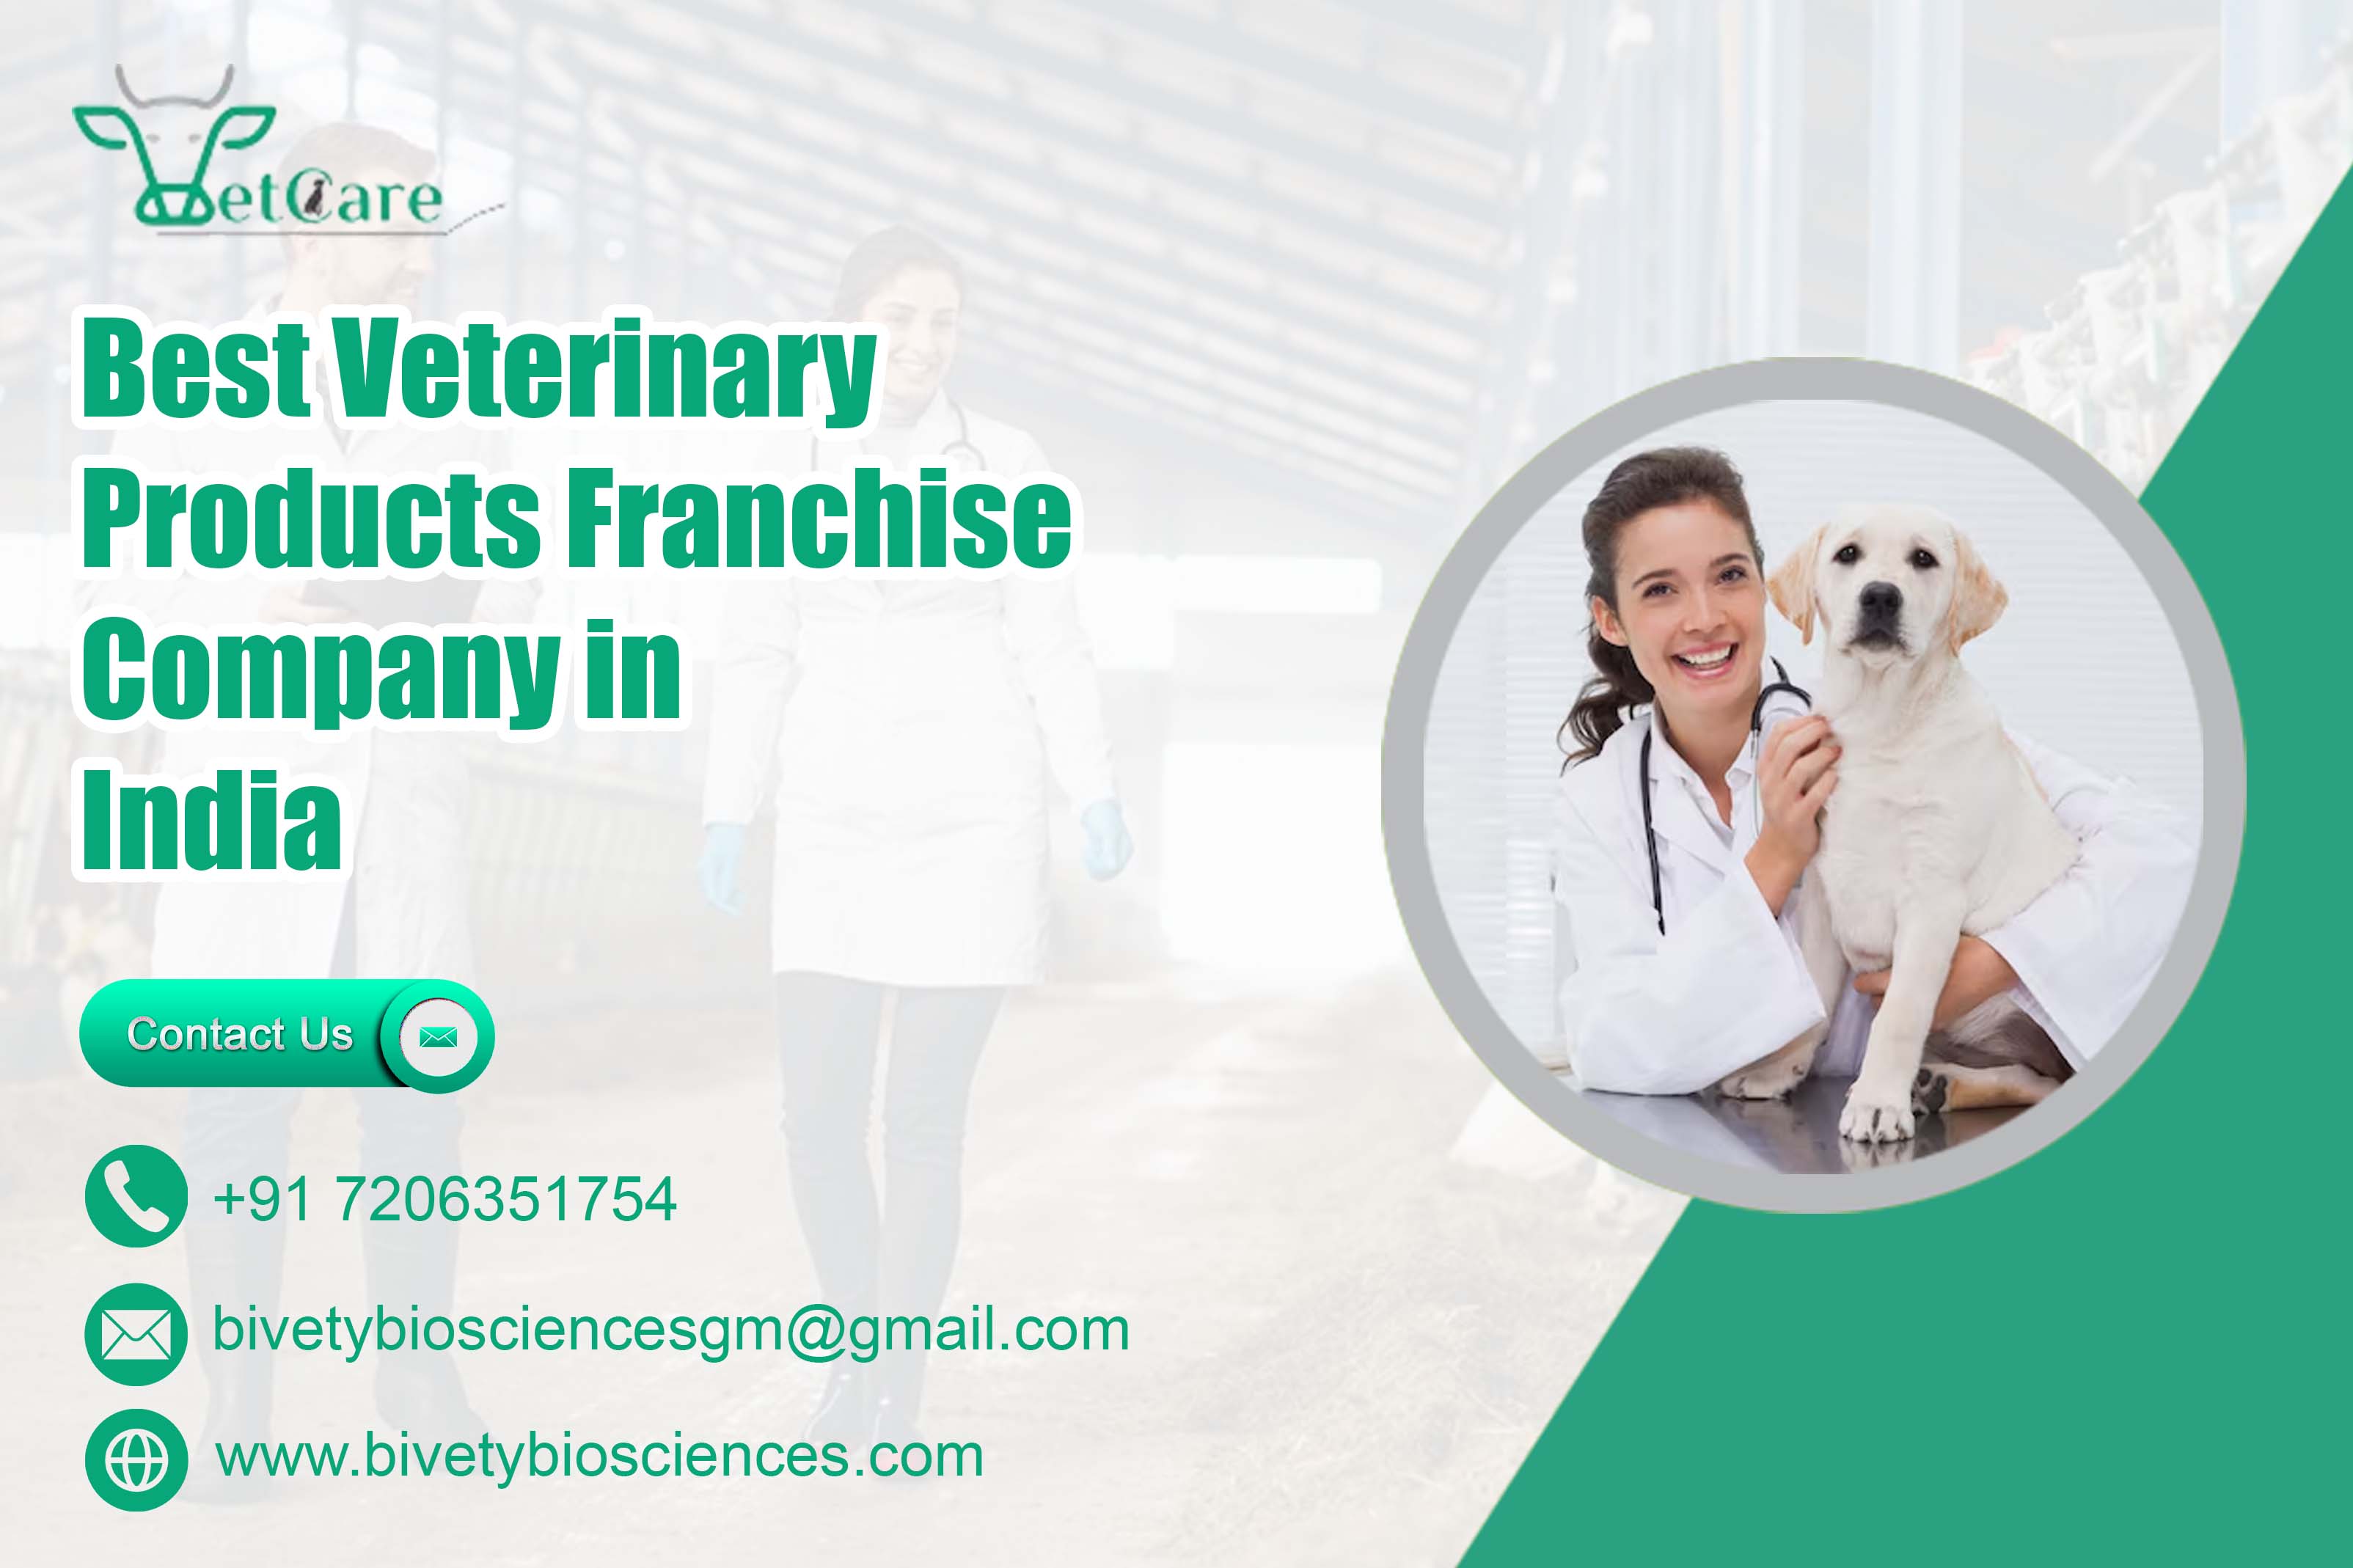 citriclabs | Best Veterinary Products Franchise Company in India